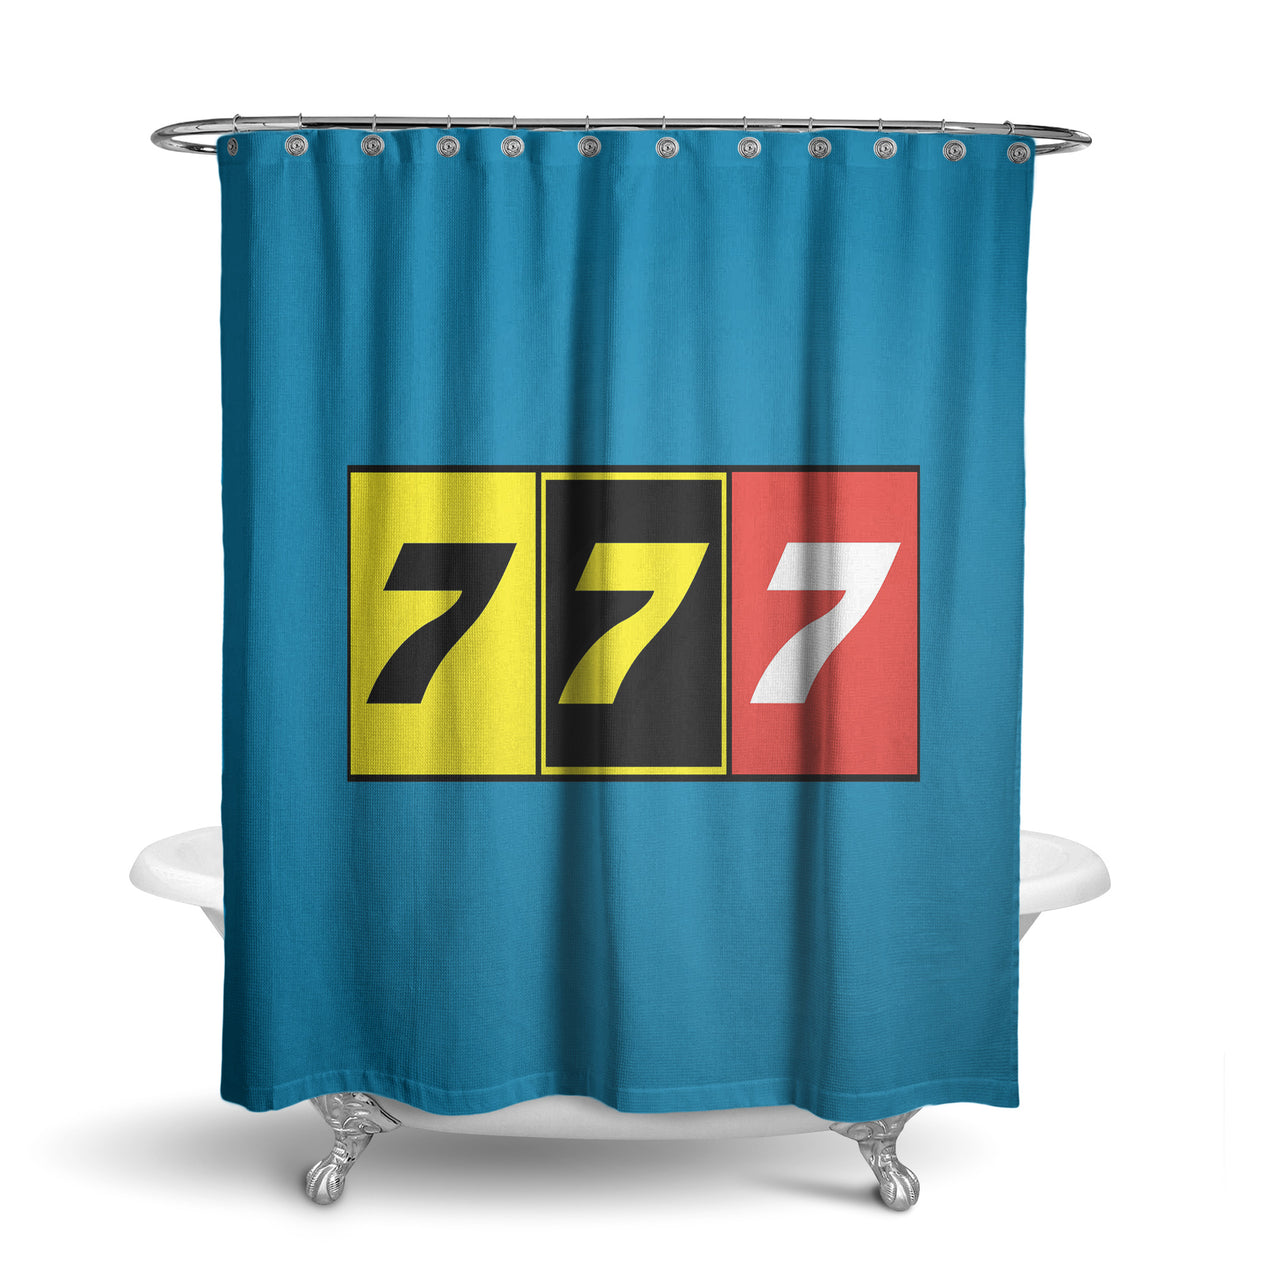 Flat Colourful 777 Designed Shower Curtains